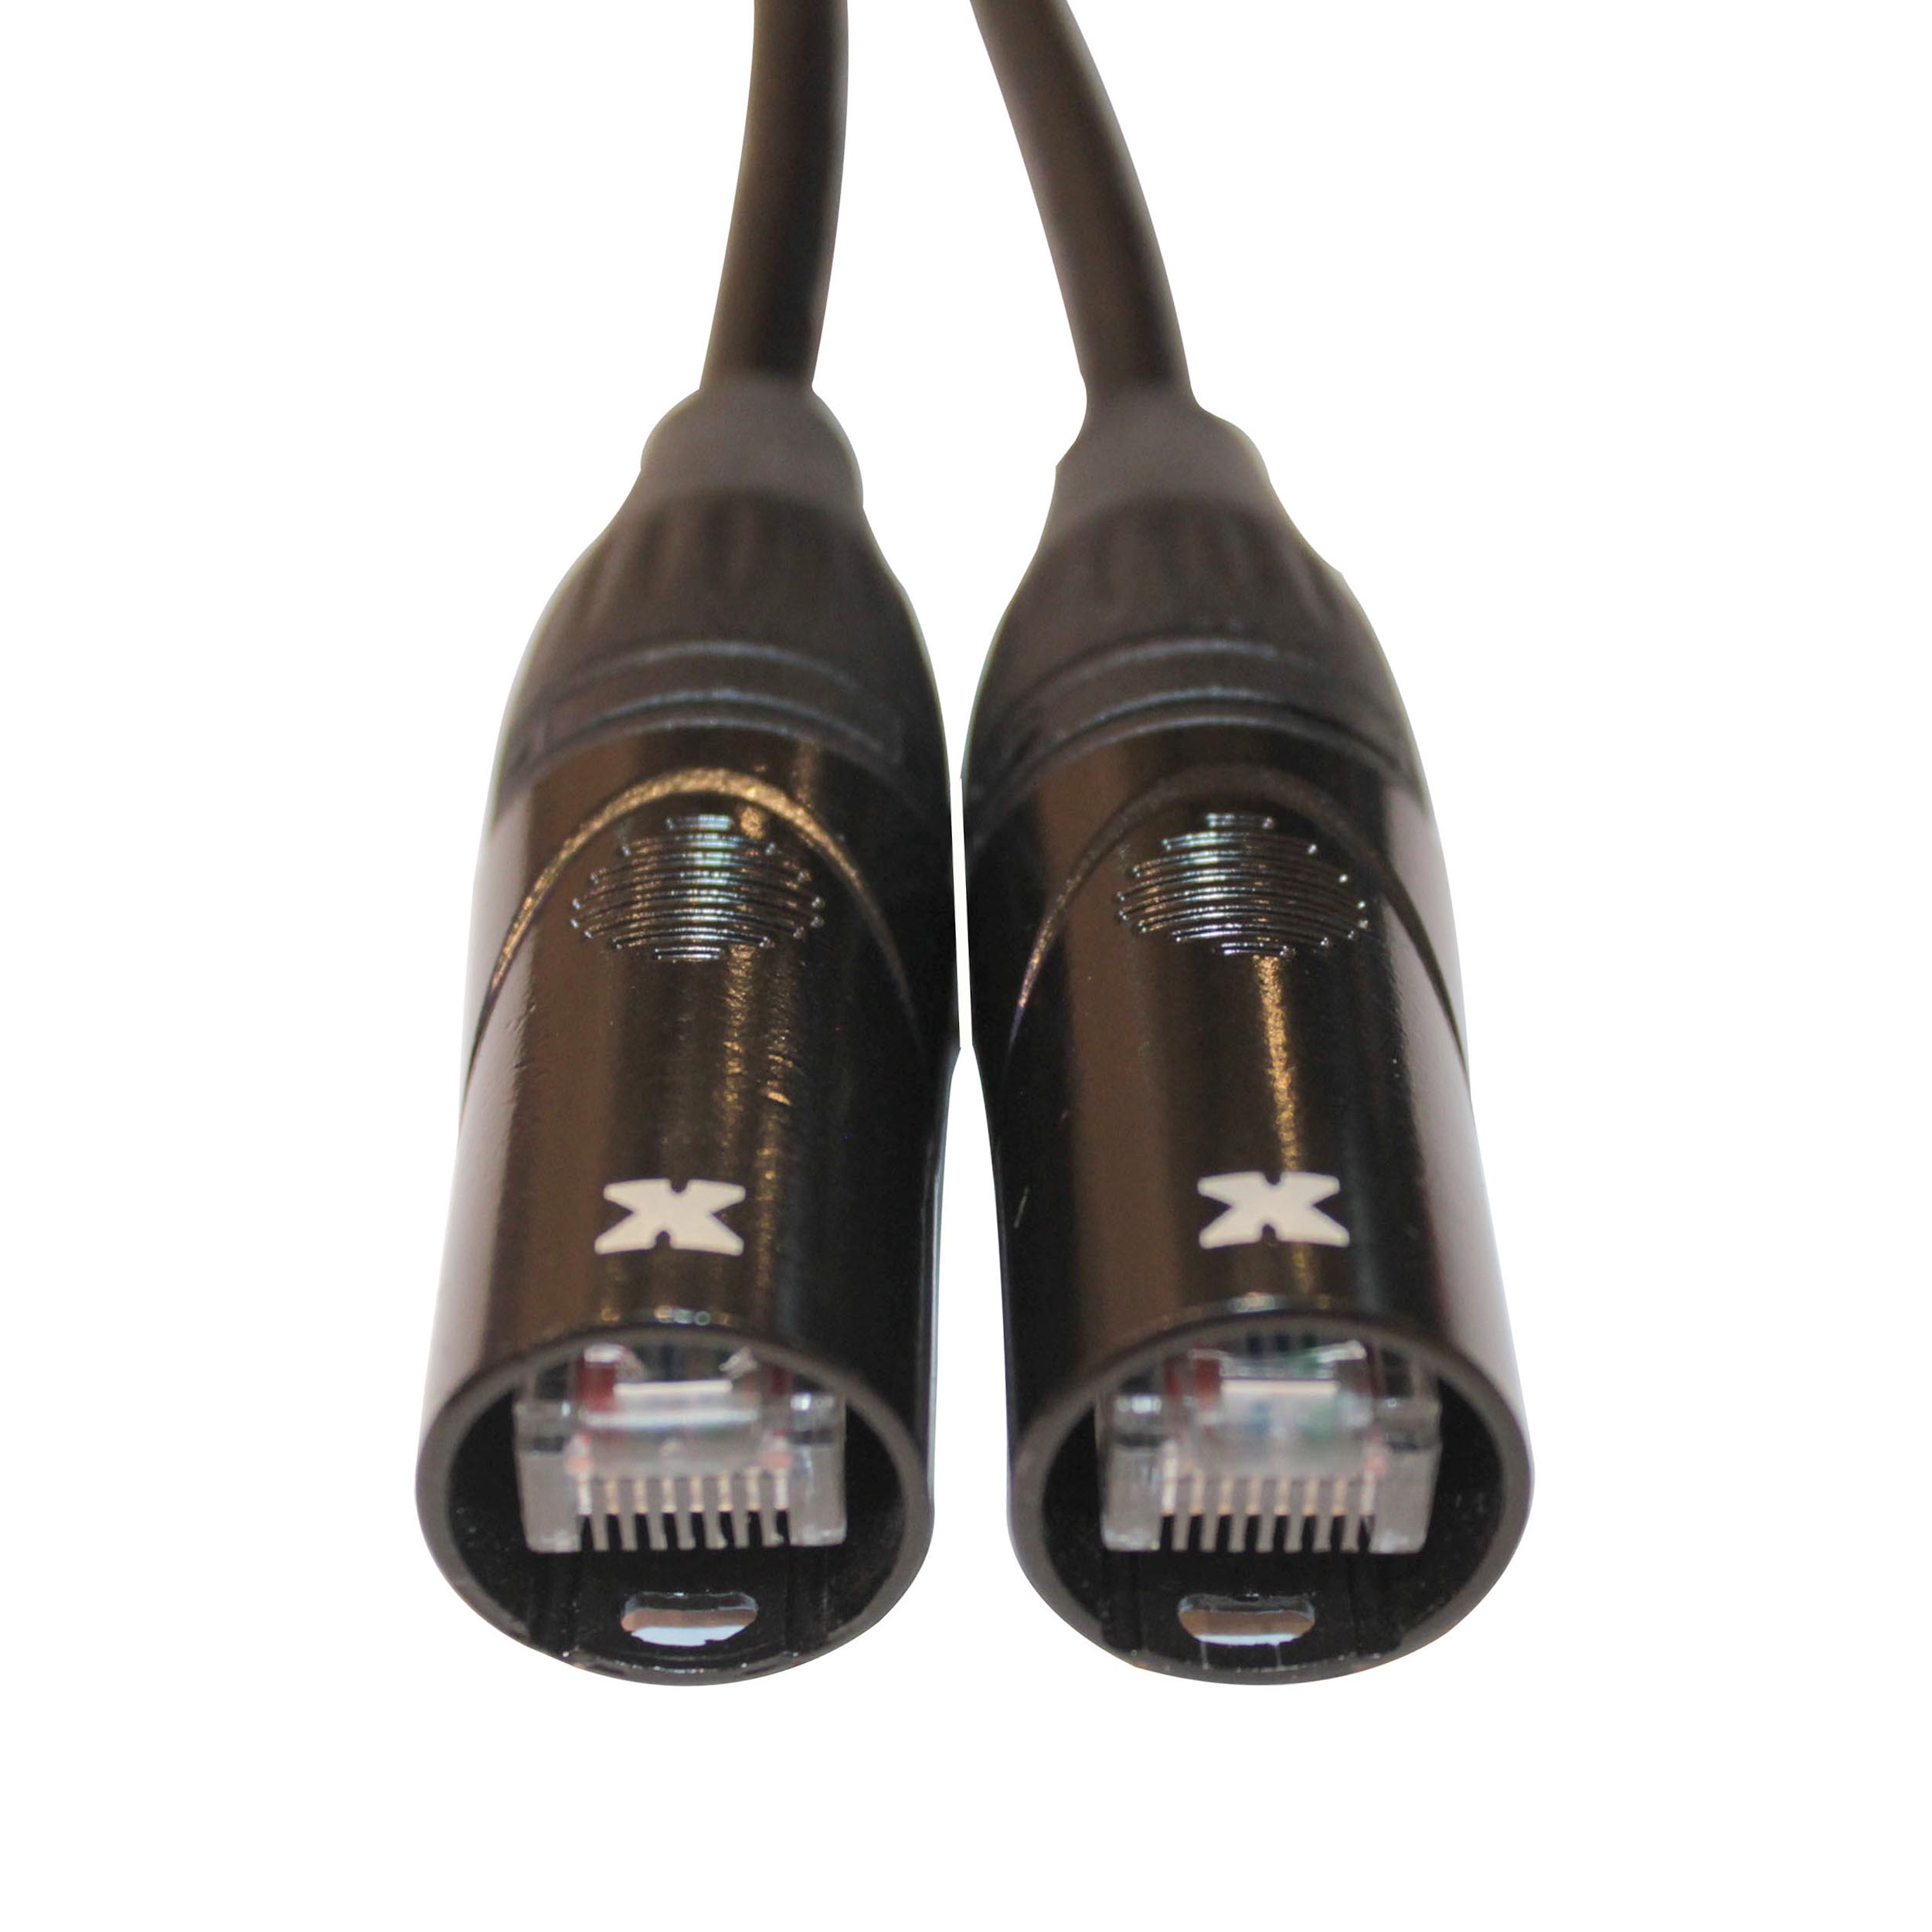 Utp Black Product Category: Hardware Connectivity/Connector C Black Box Gigatrue 3 Cat6 550-Mhz Lockable Patch Cable 0.6-M 1 X Rj-45 Male Network 2 Ft - Category 6 For Network Device Black Box Corporation 2-Ft. Black 1 X Rj-45 Male Network 